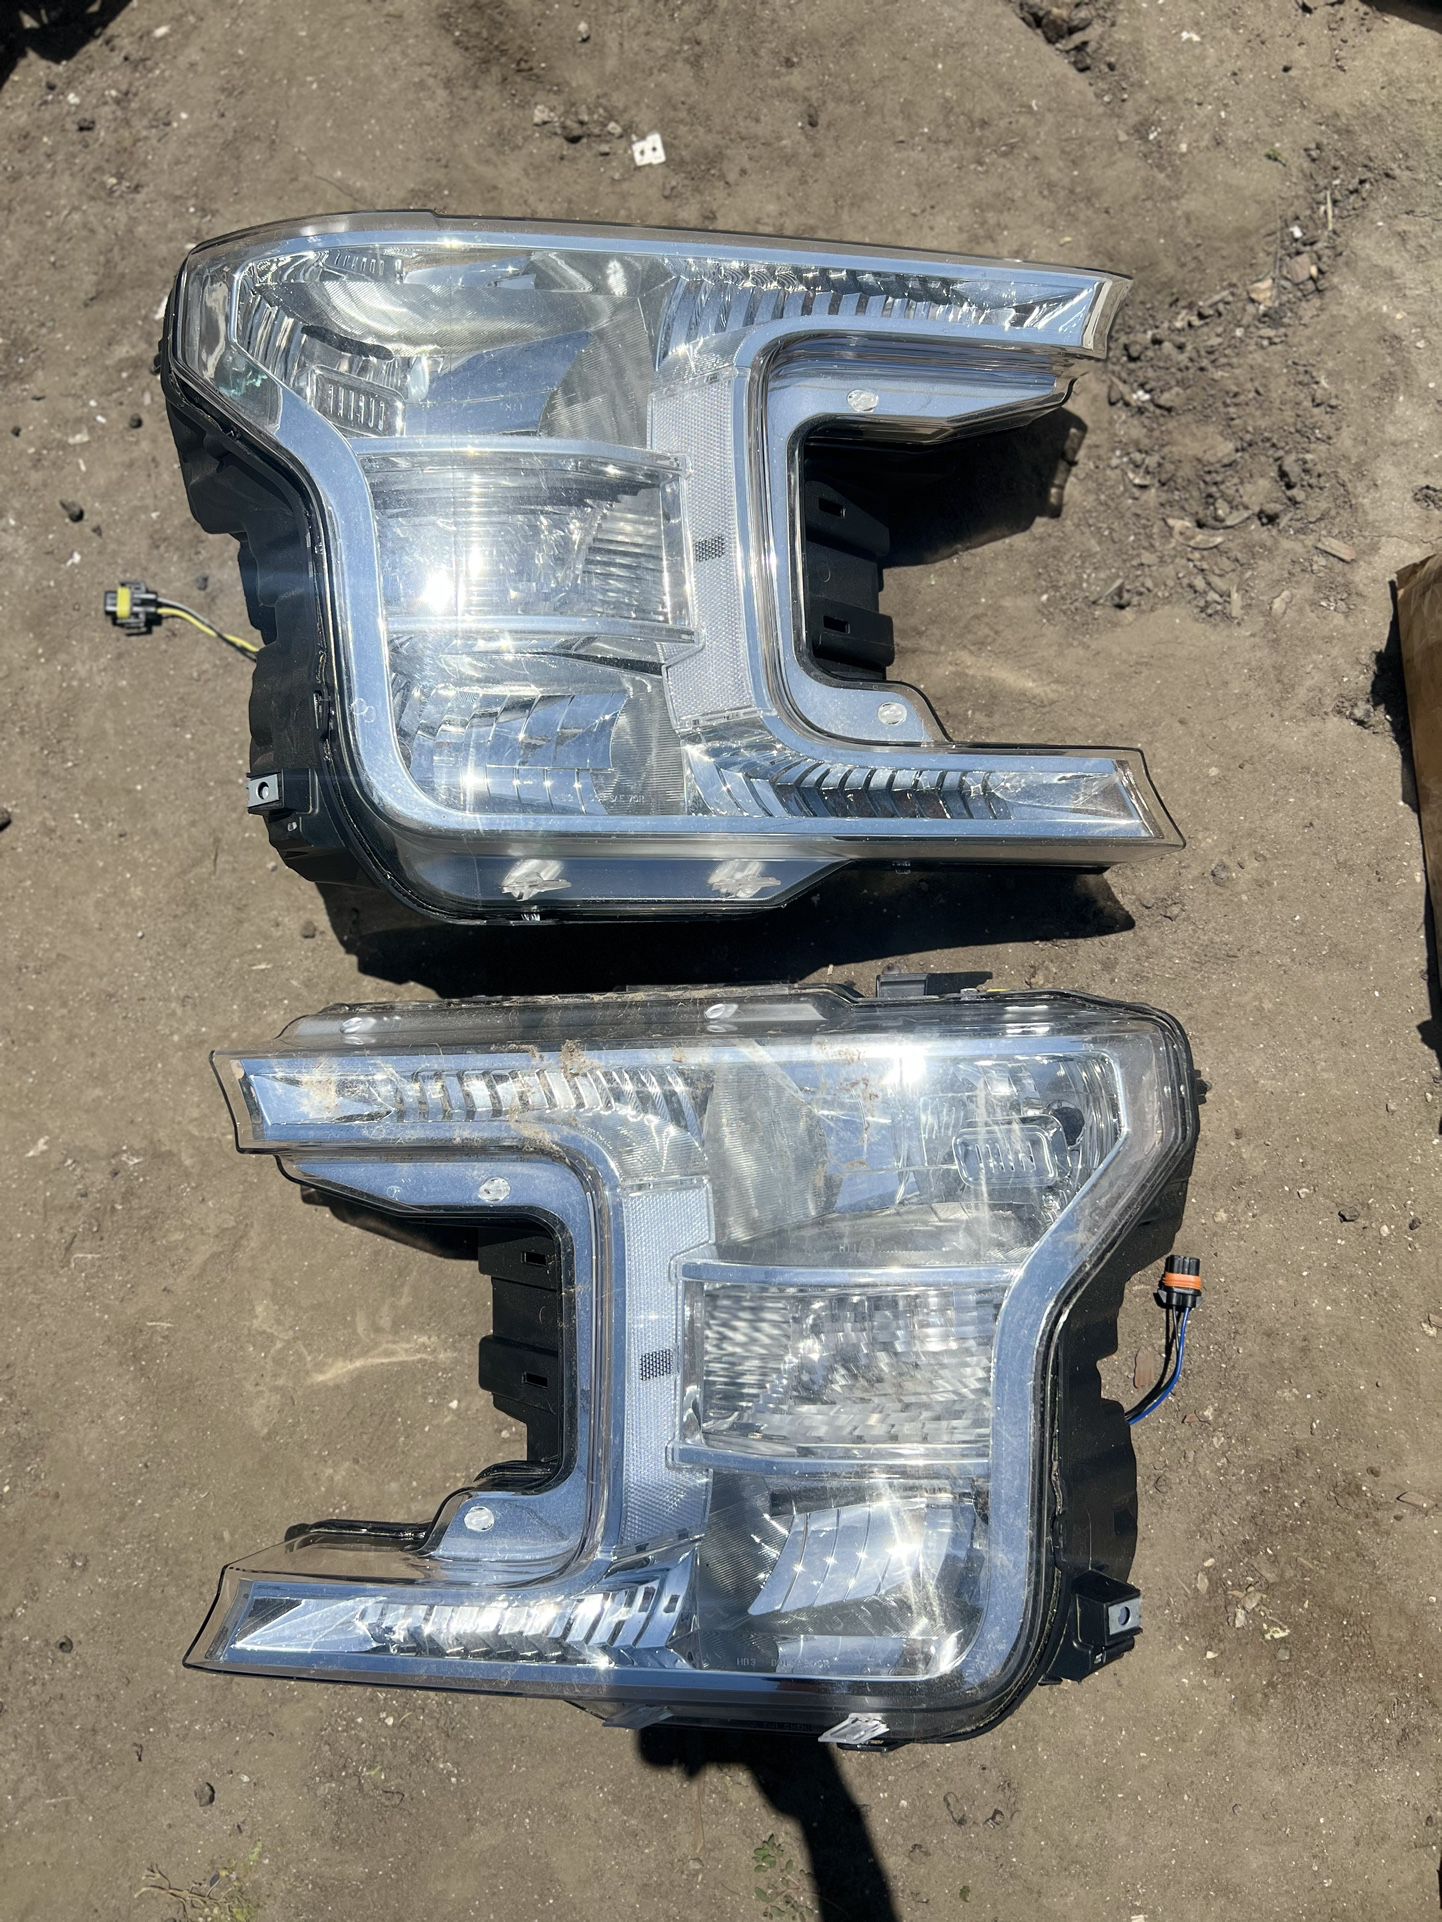 As Is 2018 To 2020 F—150 Headlights DIRTY AND Scratched 